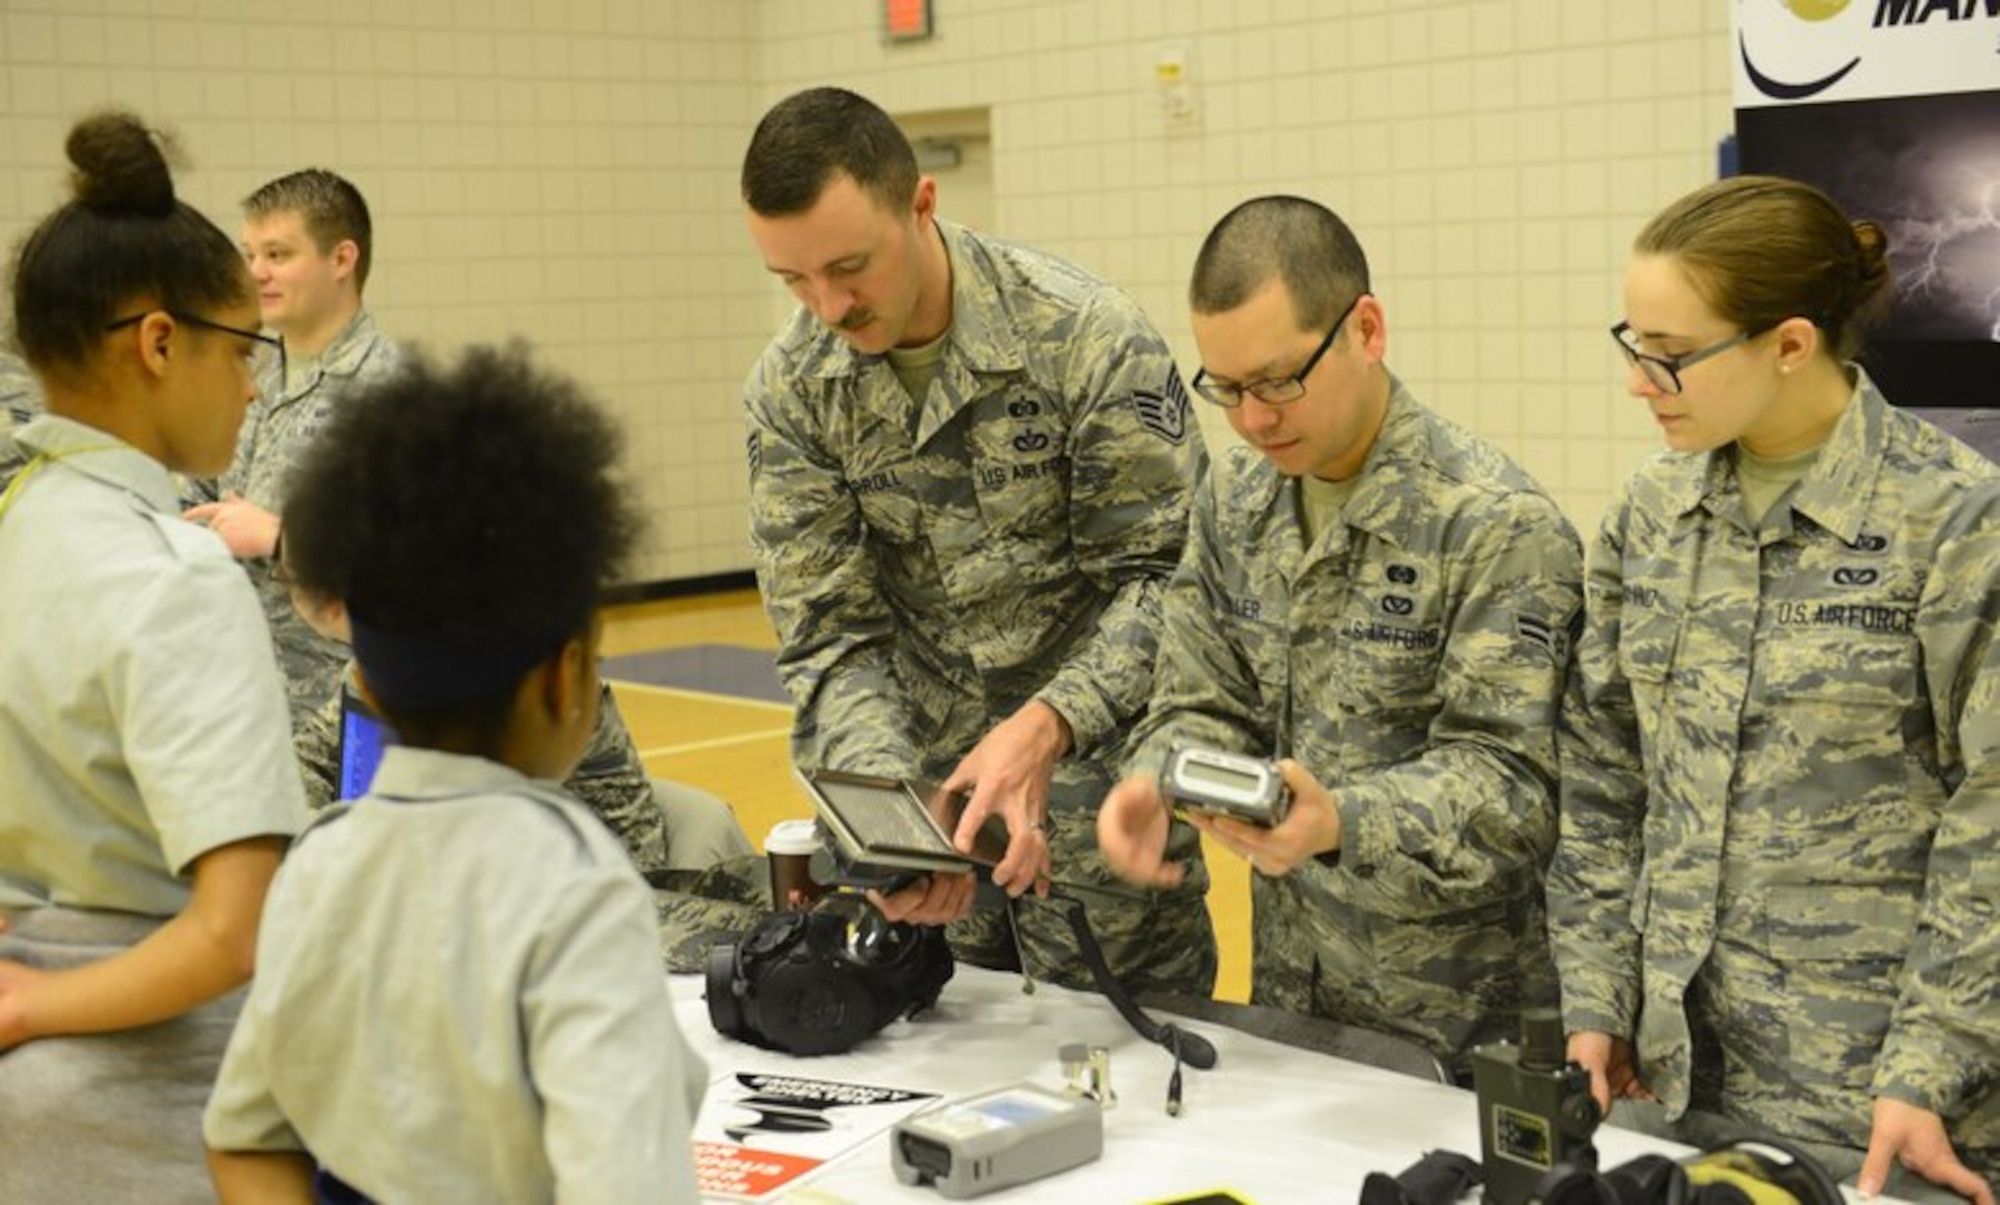 Emergency Management Airmen explain various pieces of equipment to Wichita-area students March 29, 2017, at McConnell Air Force Base, Kan. McConnell Airmen host science, technology, engineering and mathematics events regularly to encourage students to pursue STEM-related careers.